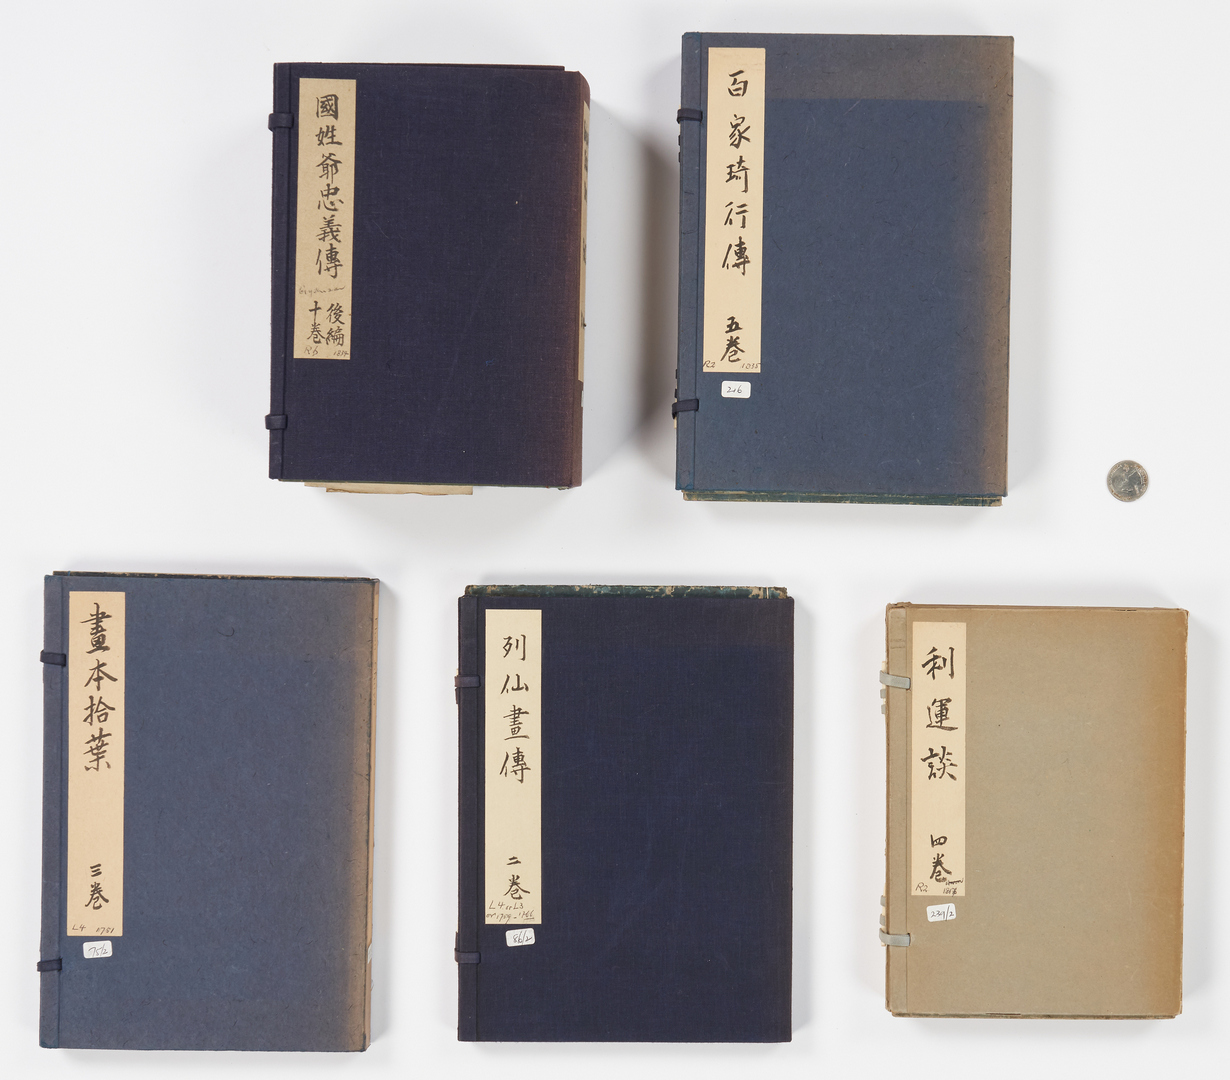 Lot 18: 7 Bound Groups of Japanese Woodblock Books plus 4 reference books